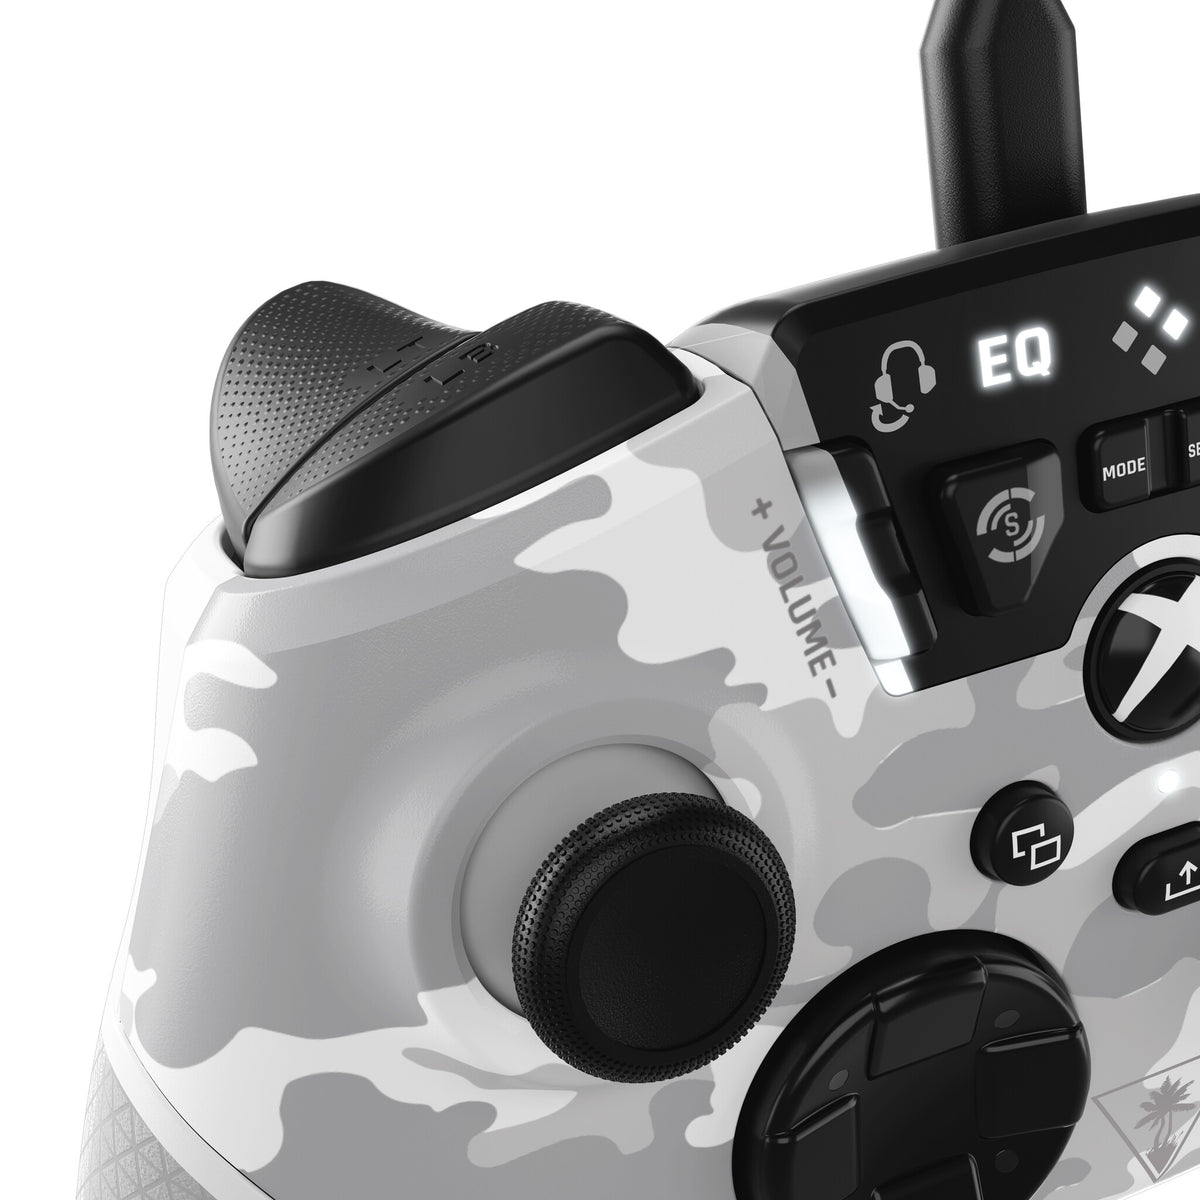 Turtle Beach Recon Cloud - Bluetooth/USB Gamepad for Android / PC / Xbox Series X|S in Artic Camo